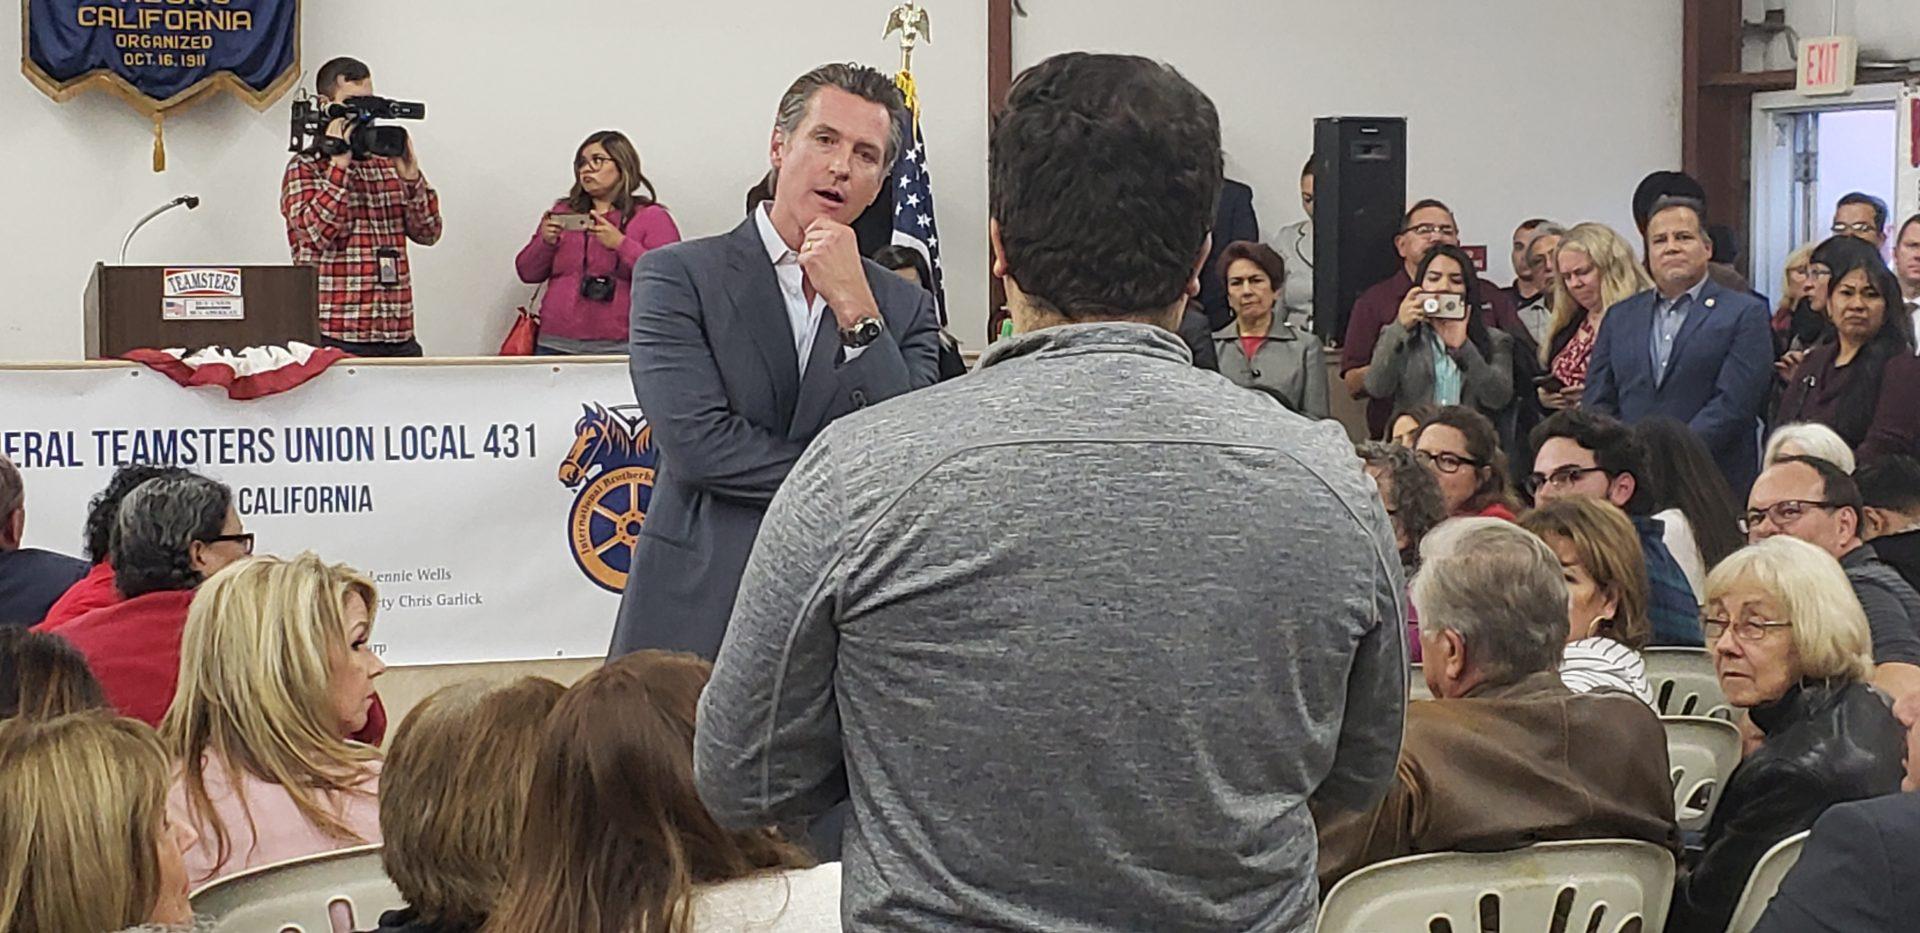 California+Gov.-elect+Gavin+Newsom+fields+a+question+from+a+Central+Valley+resident+during+a+community+open+forum+in+Fresno+on+Dec.+7.+%28Seth+Casey%2FThe+Collegian%29